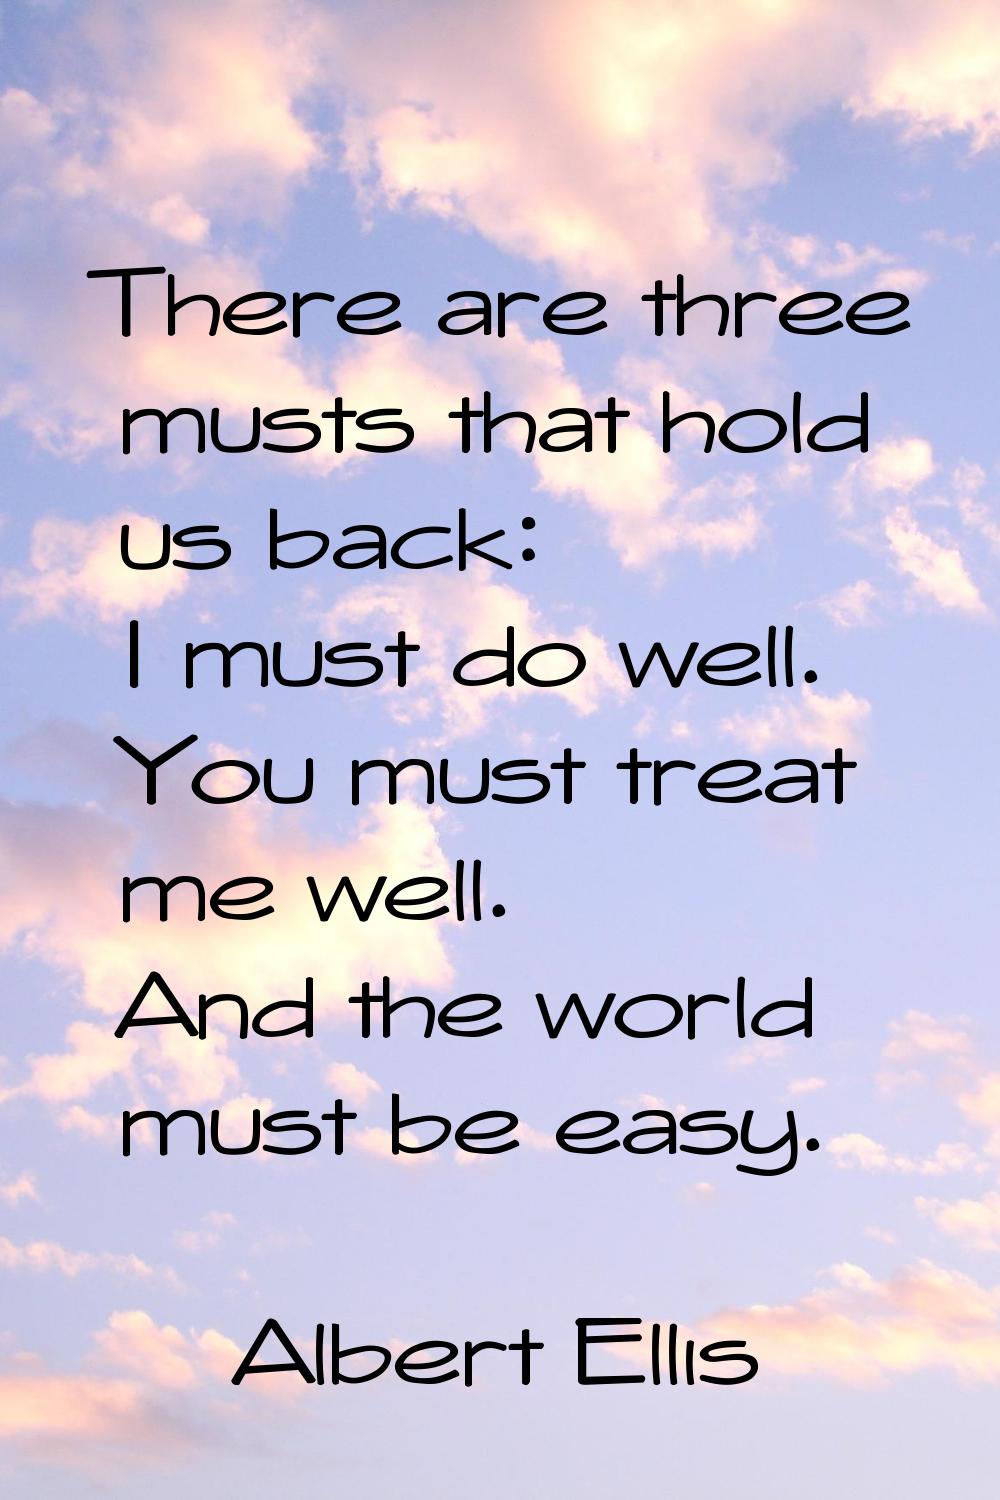 There are three musts that hold us back: I must do well. You must treat me well. And the world must